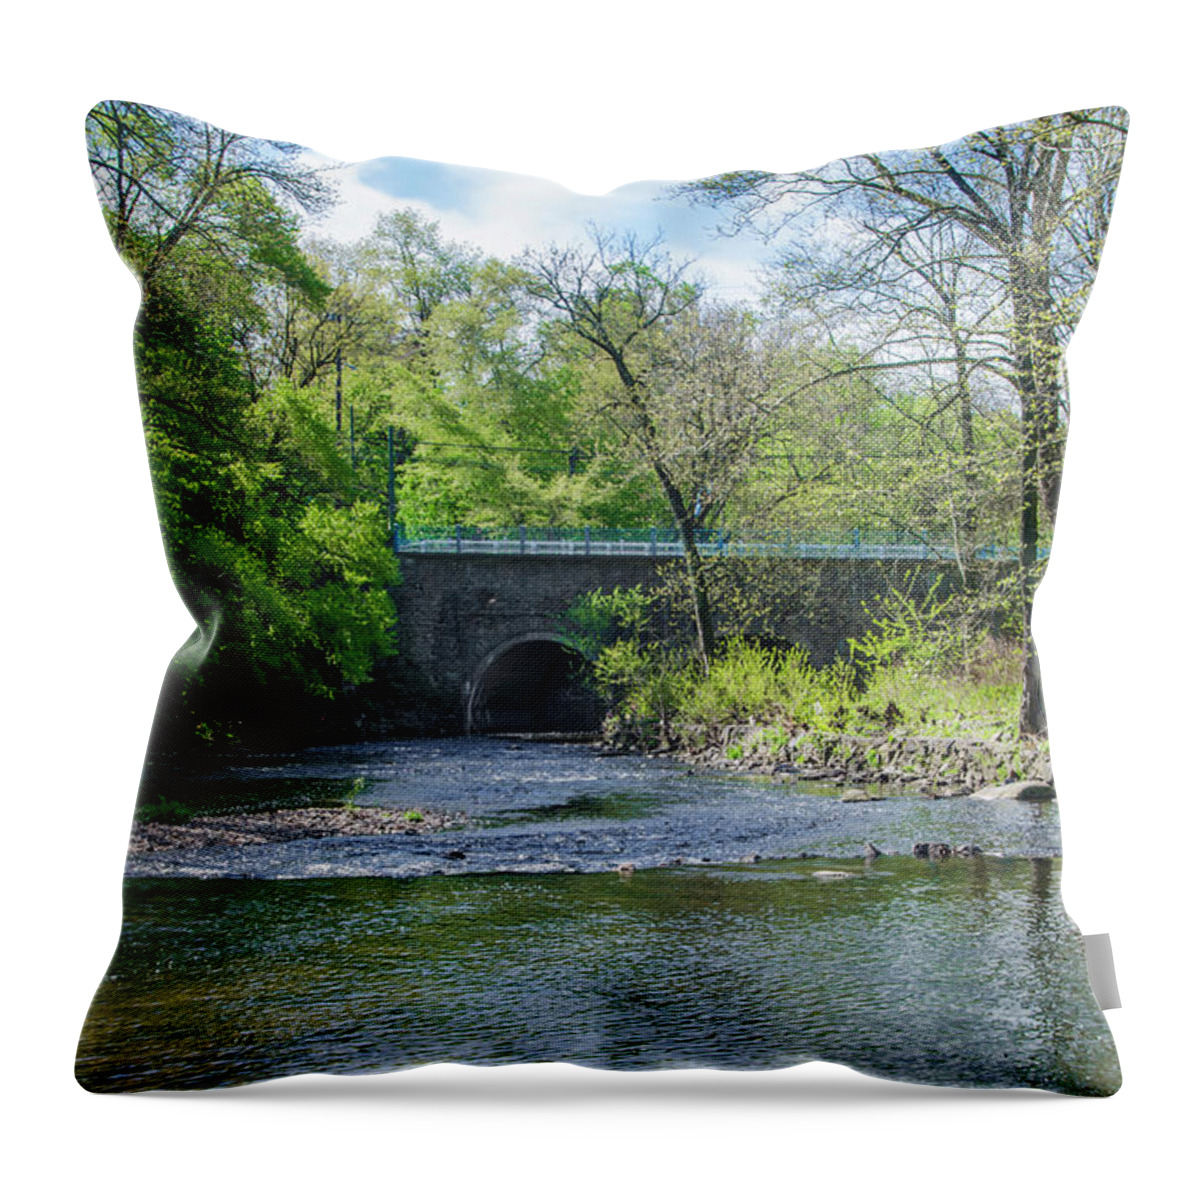 Pennypack Throw Pillow featuring the photograph Pennypack Creek Bridge Built 1697 by Bill Cannon